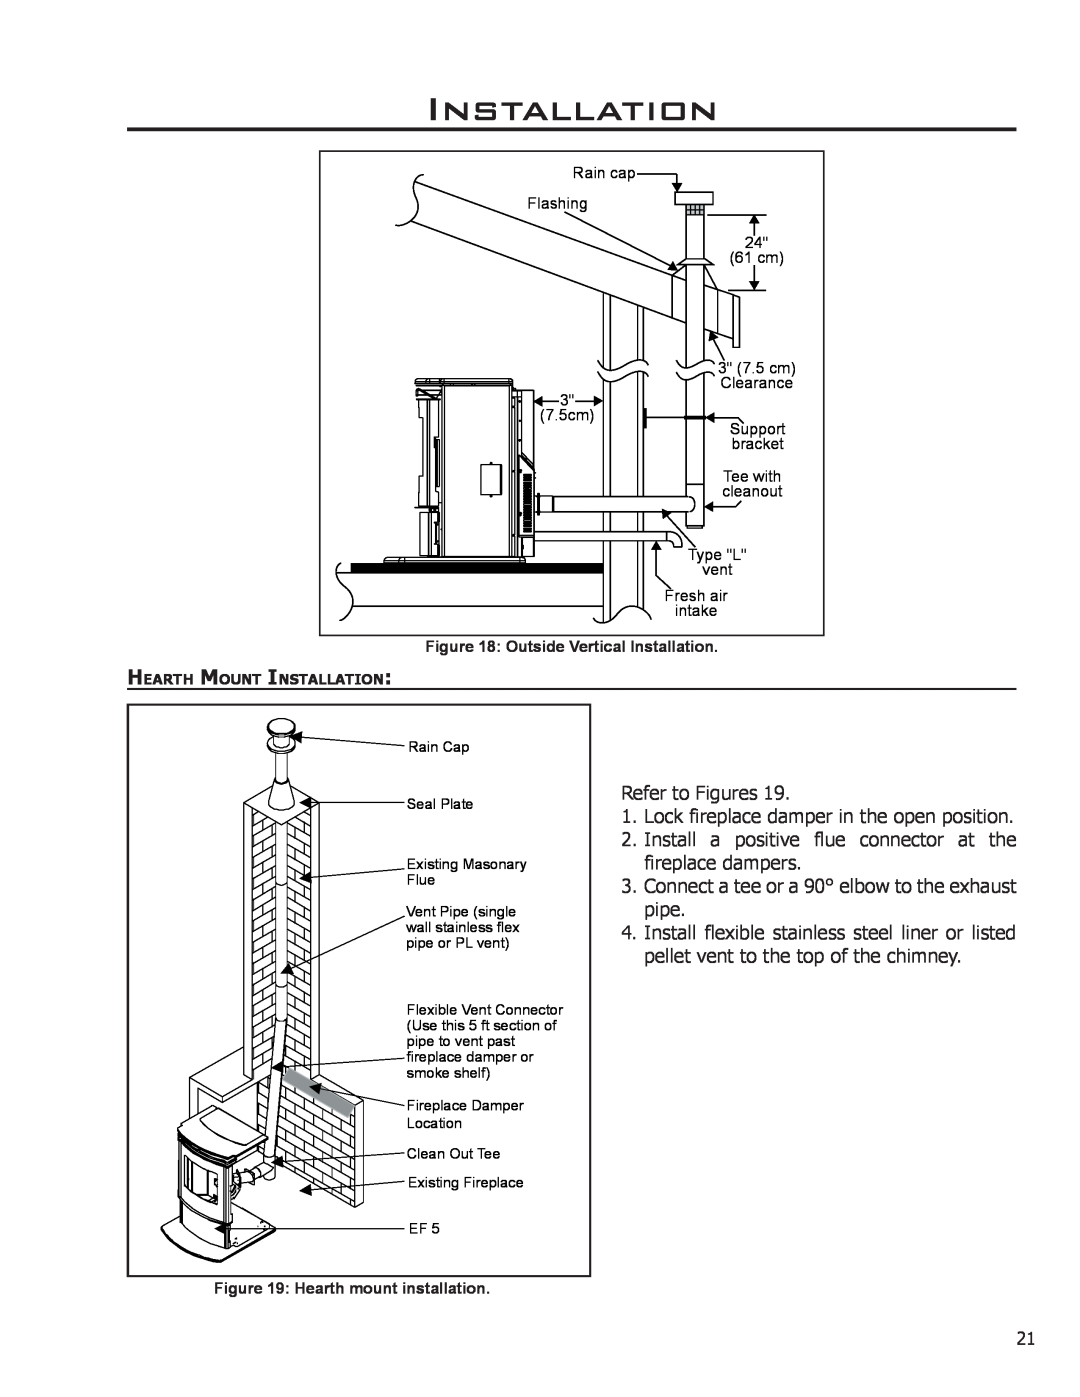 Enviro C-11023 owner manual Installation, Refer to Figures 1. Lock fireplace damper in the open position 